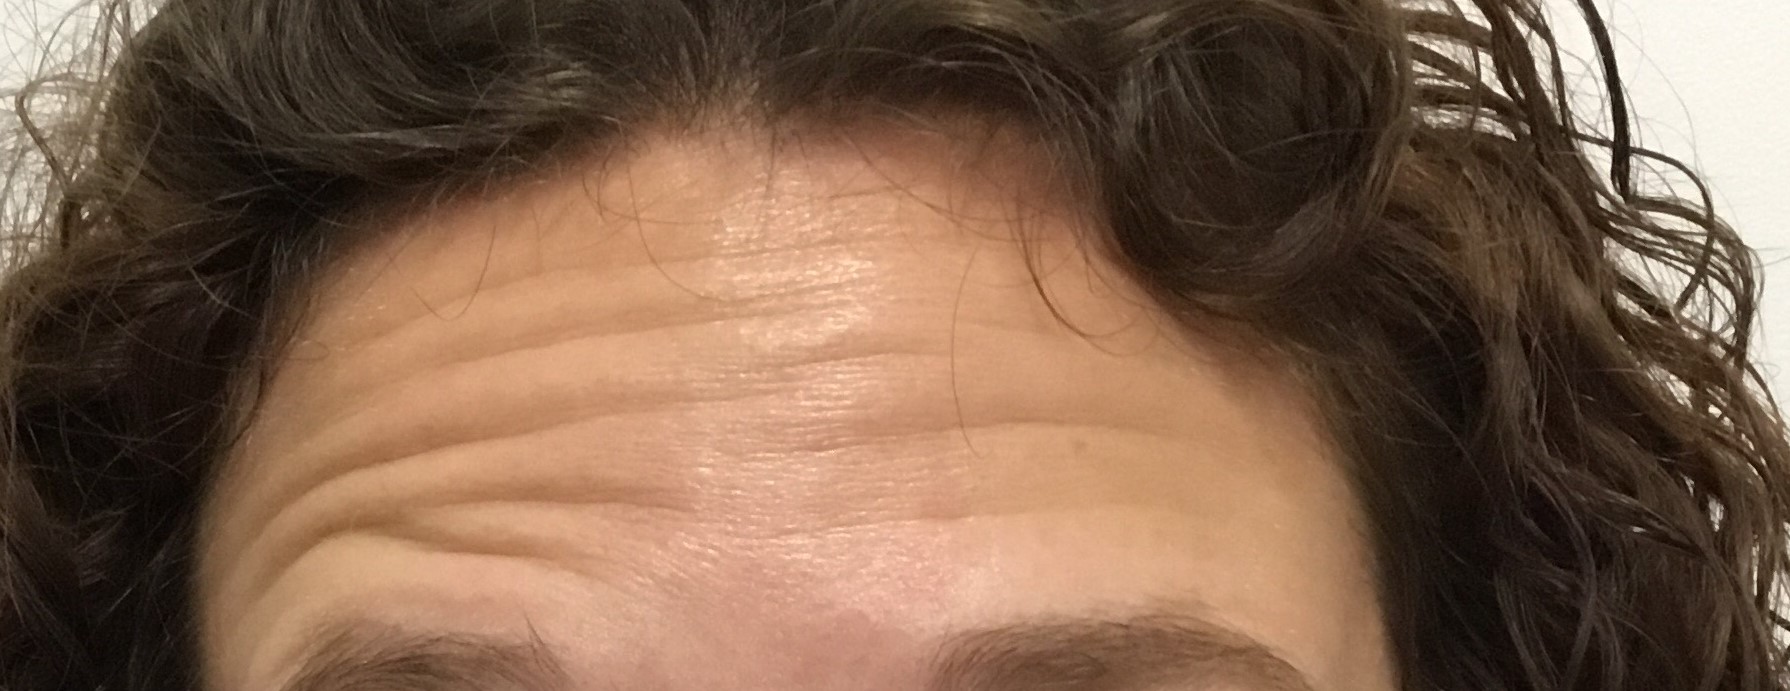 Before: Frontalis (forehead muscle) movement